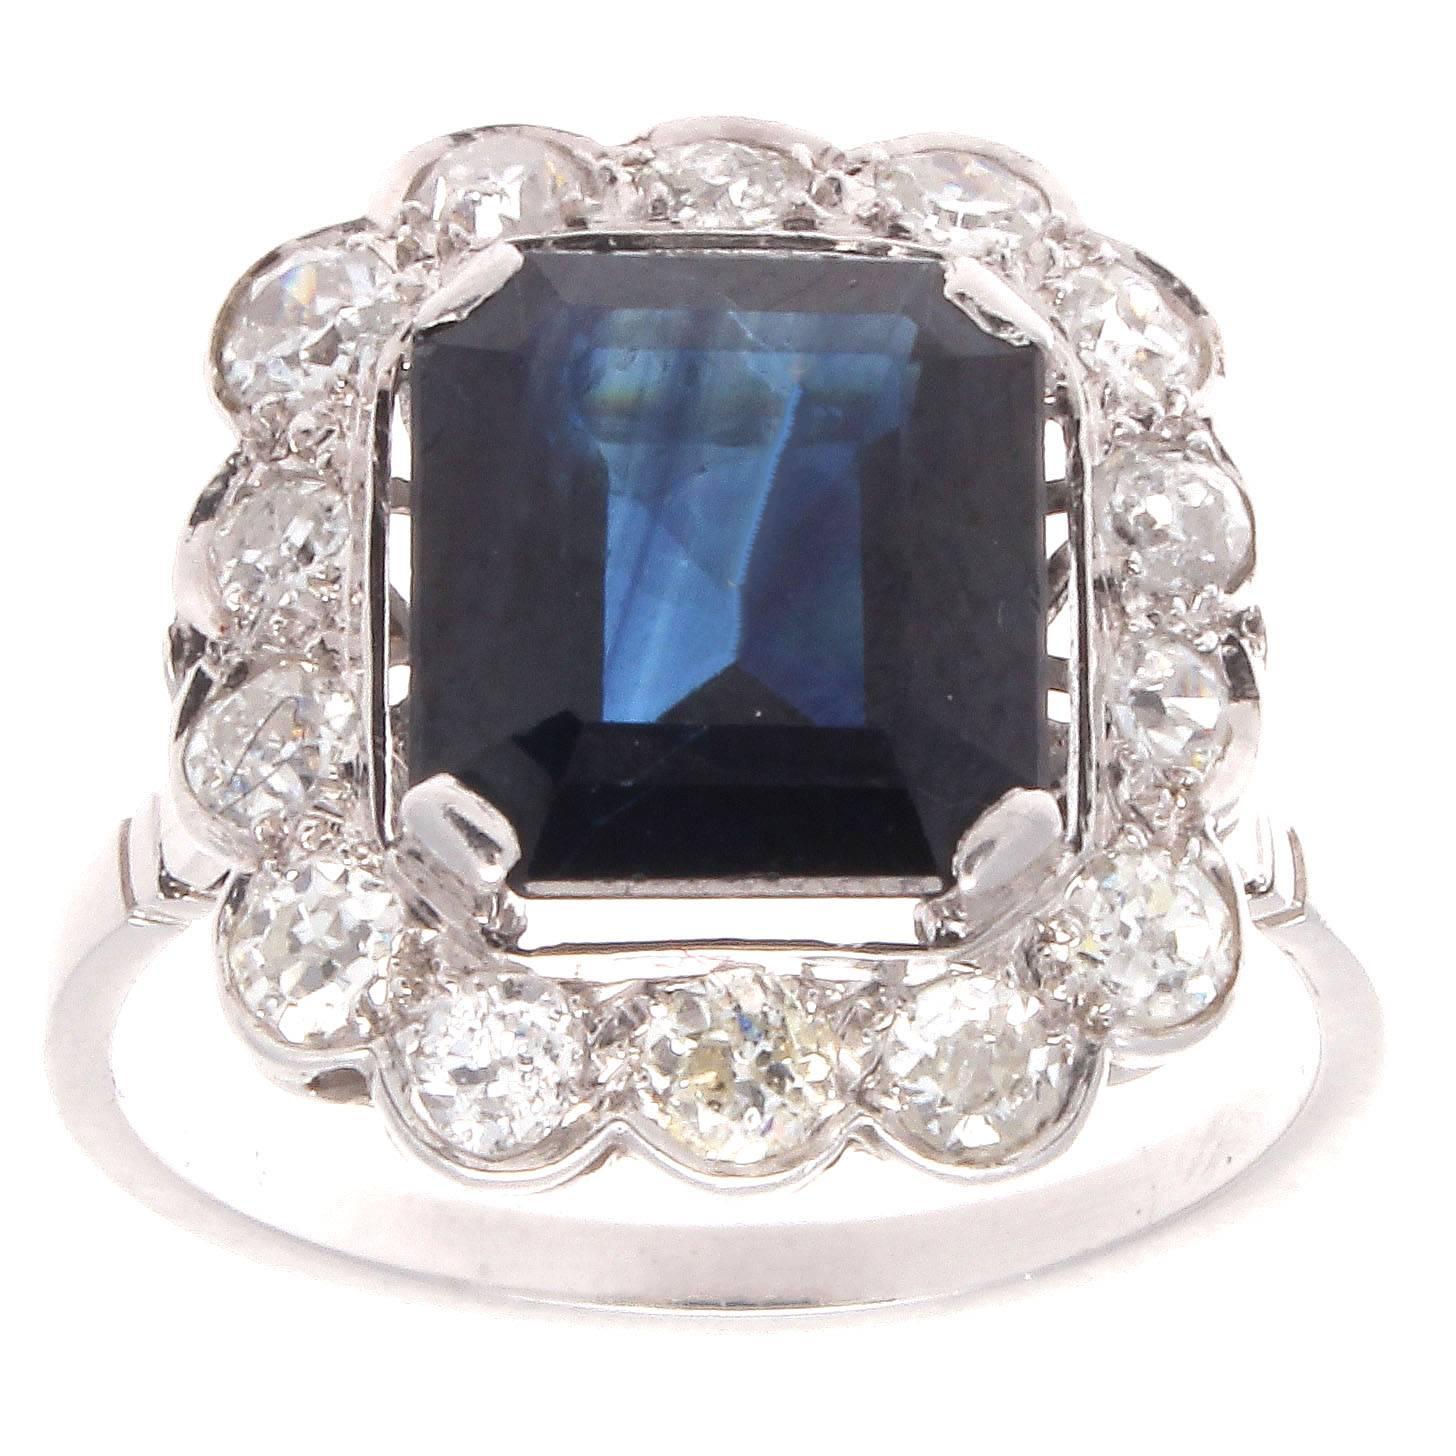 A stylish creation of pure artistry from Paris. Featuring a deep blue emerald cut sapphire that has been elegantly surrounded by a halo of near colorless diamonds. Hand crafted in platinum.

Ring size 6-3/4 and may be resized to fit.

 